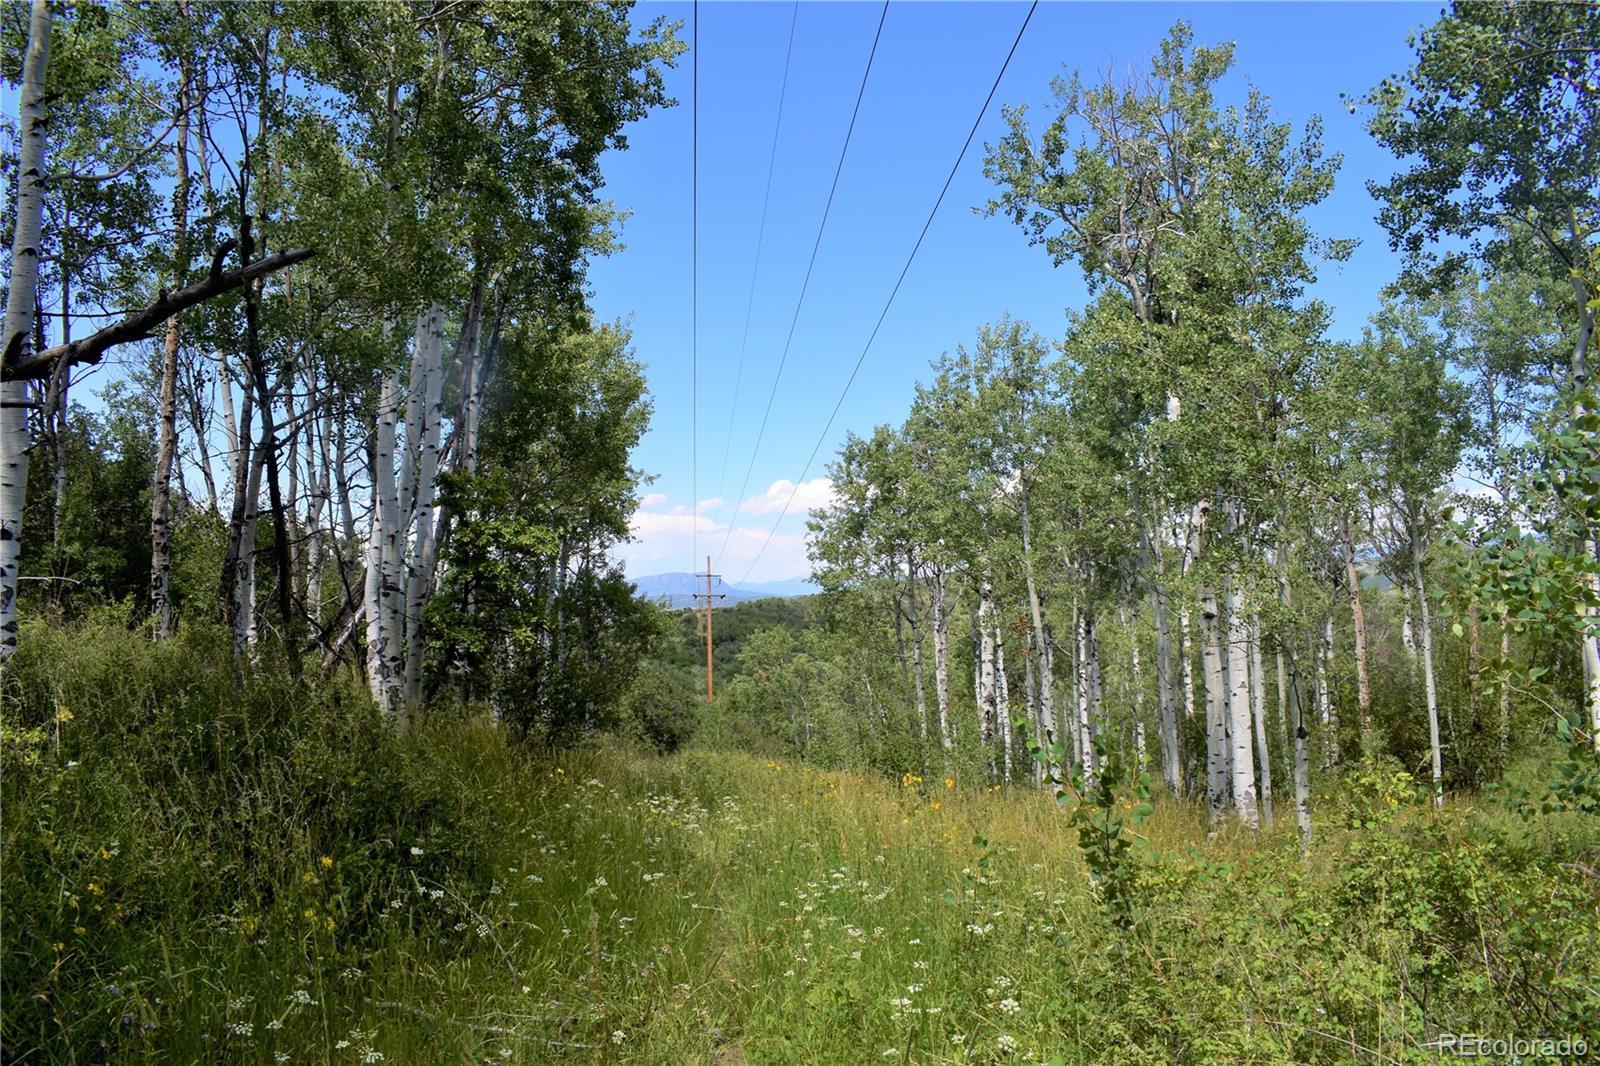  County Road 179, Lot 23, Steamboat Springs, CO